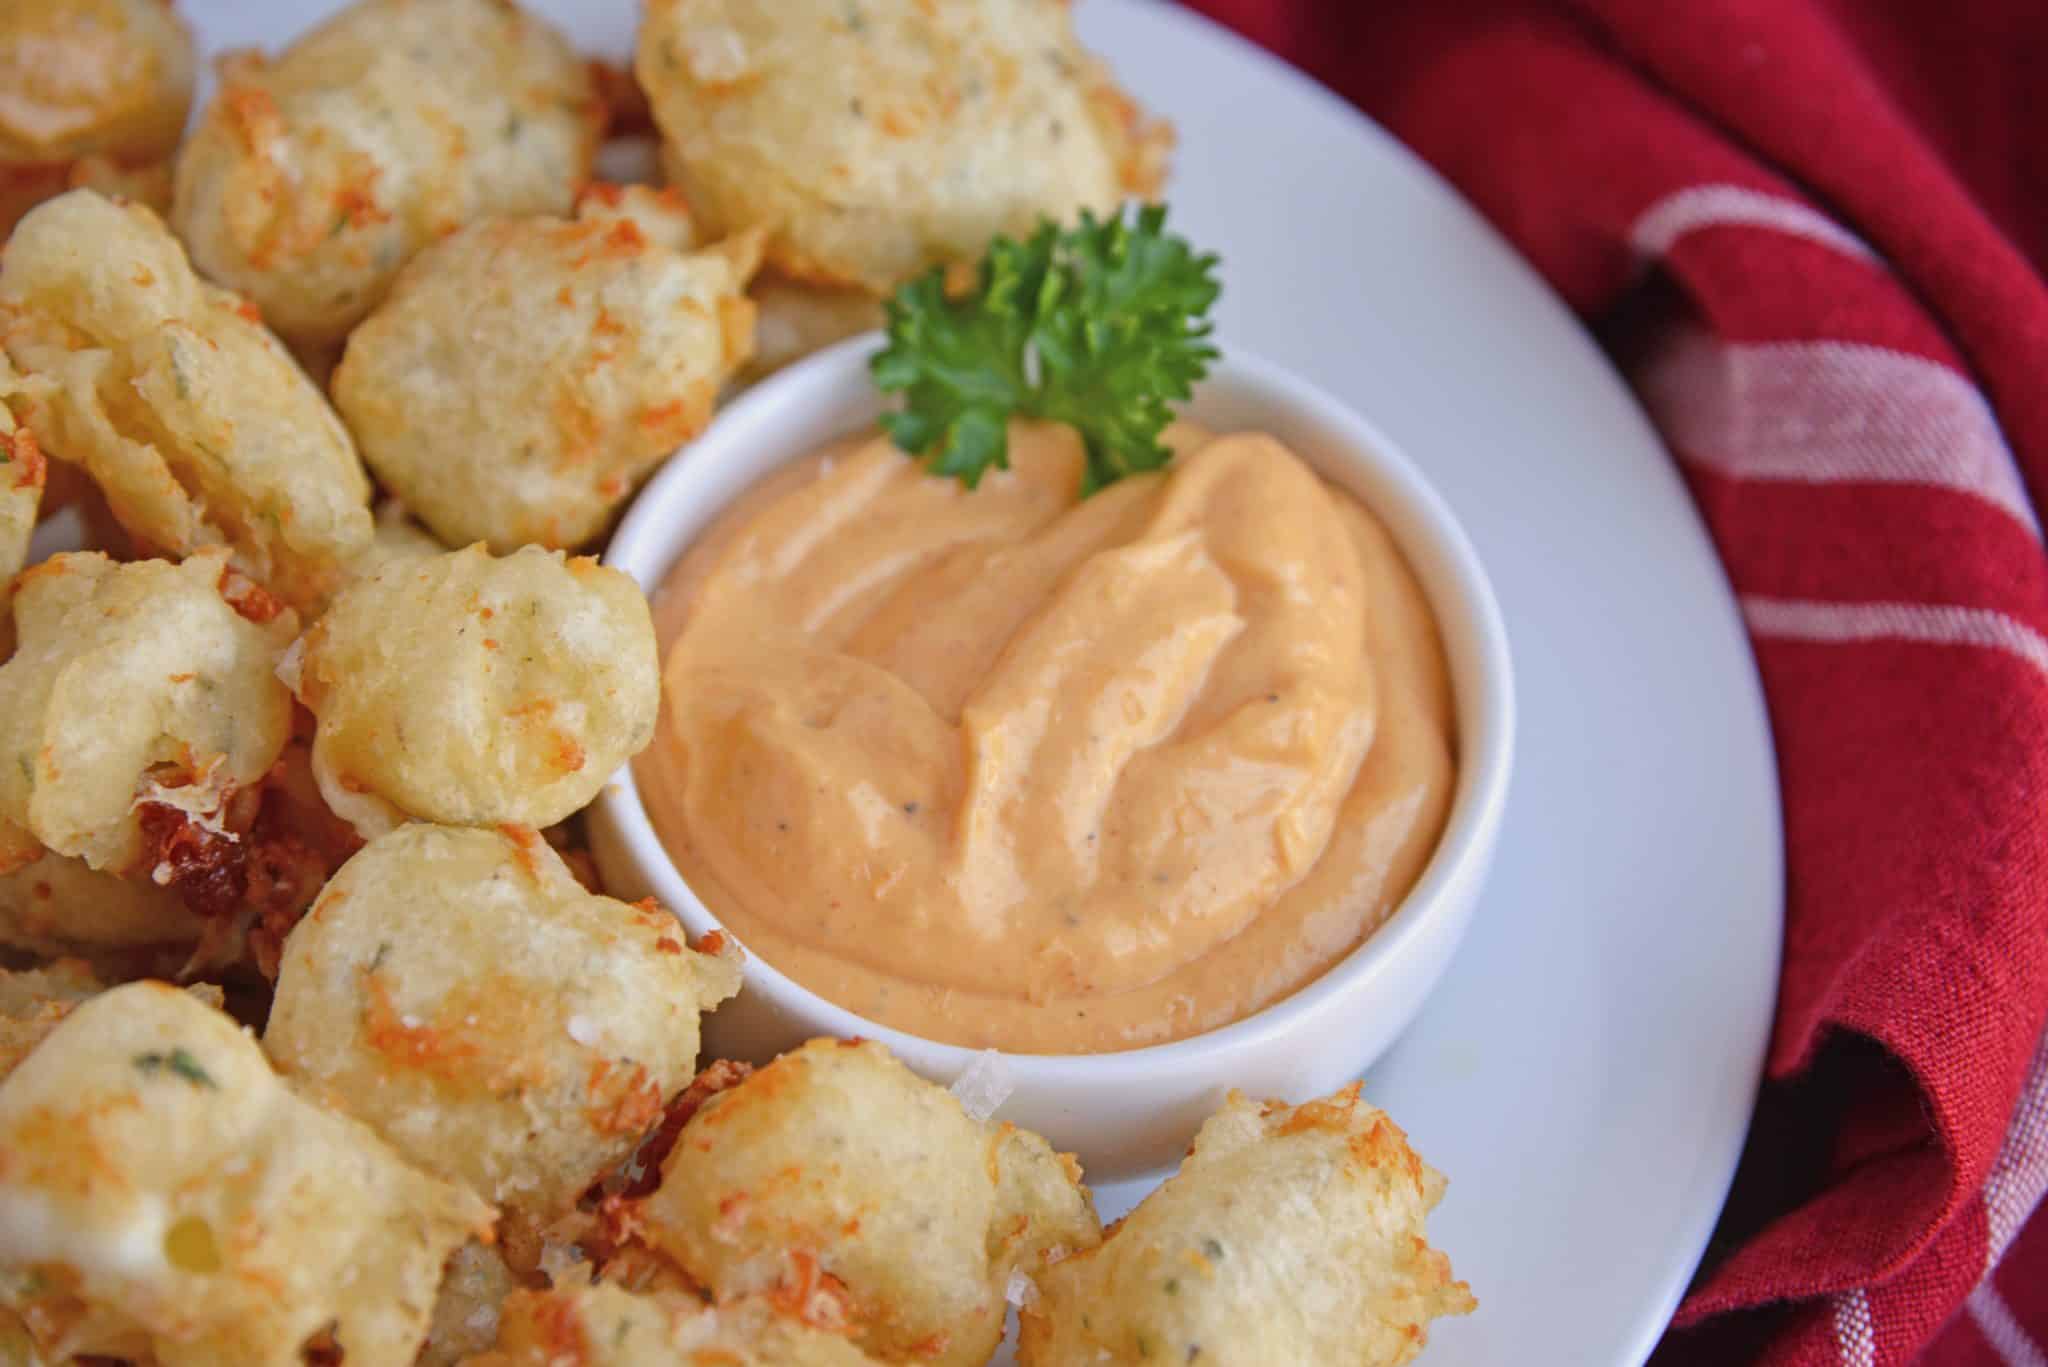 Fried Cheese Curds, also known as Beer Battered Cheese Curds, as the perfect fried cheese balls! Gooey little nuggets paired with a tangy dipping sauce served as an easy appetizer. #friedcheese #friedcheesecurds www.savoryexperiments.com